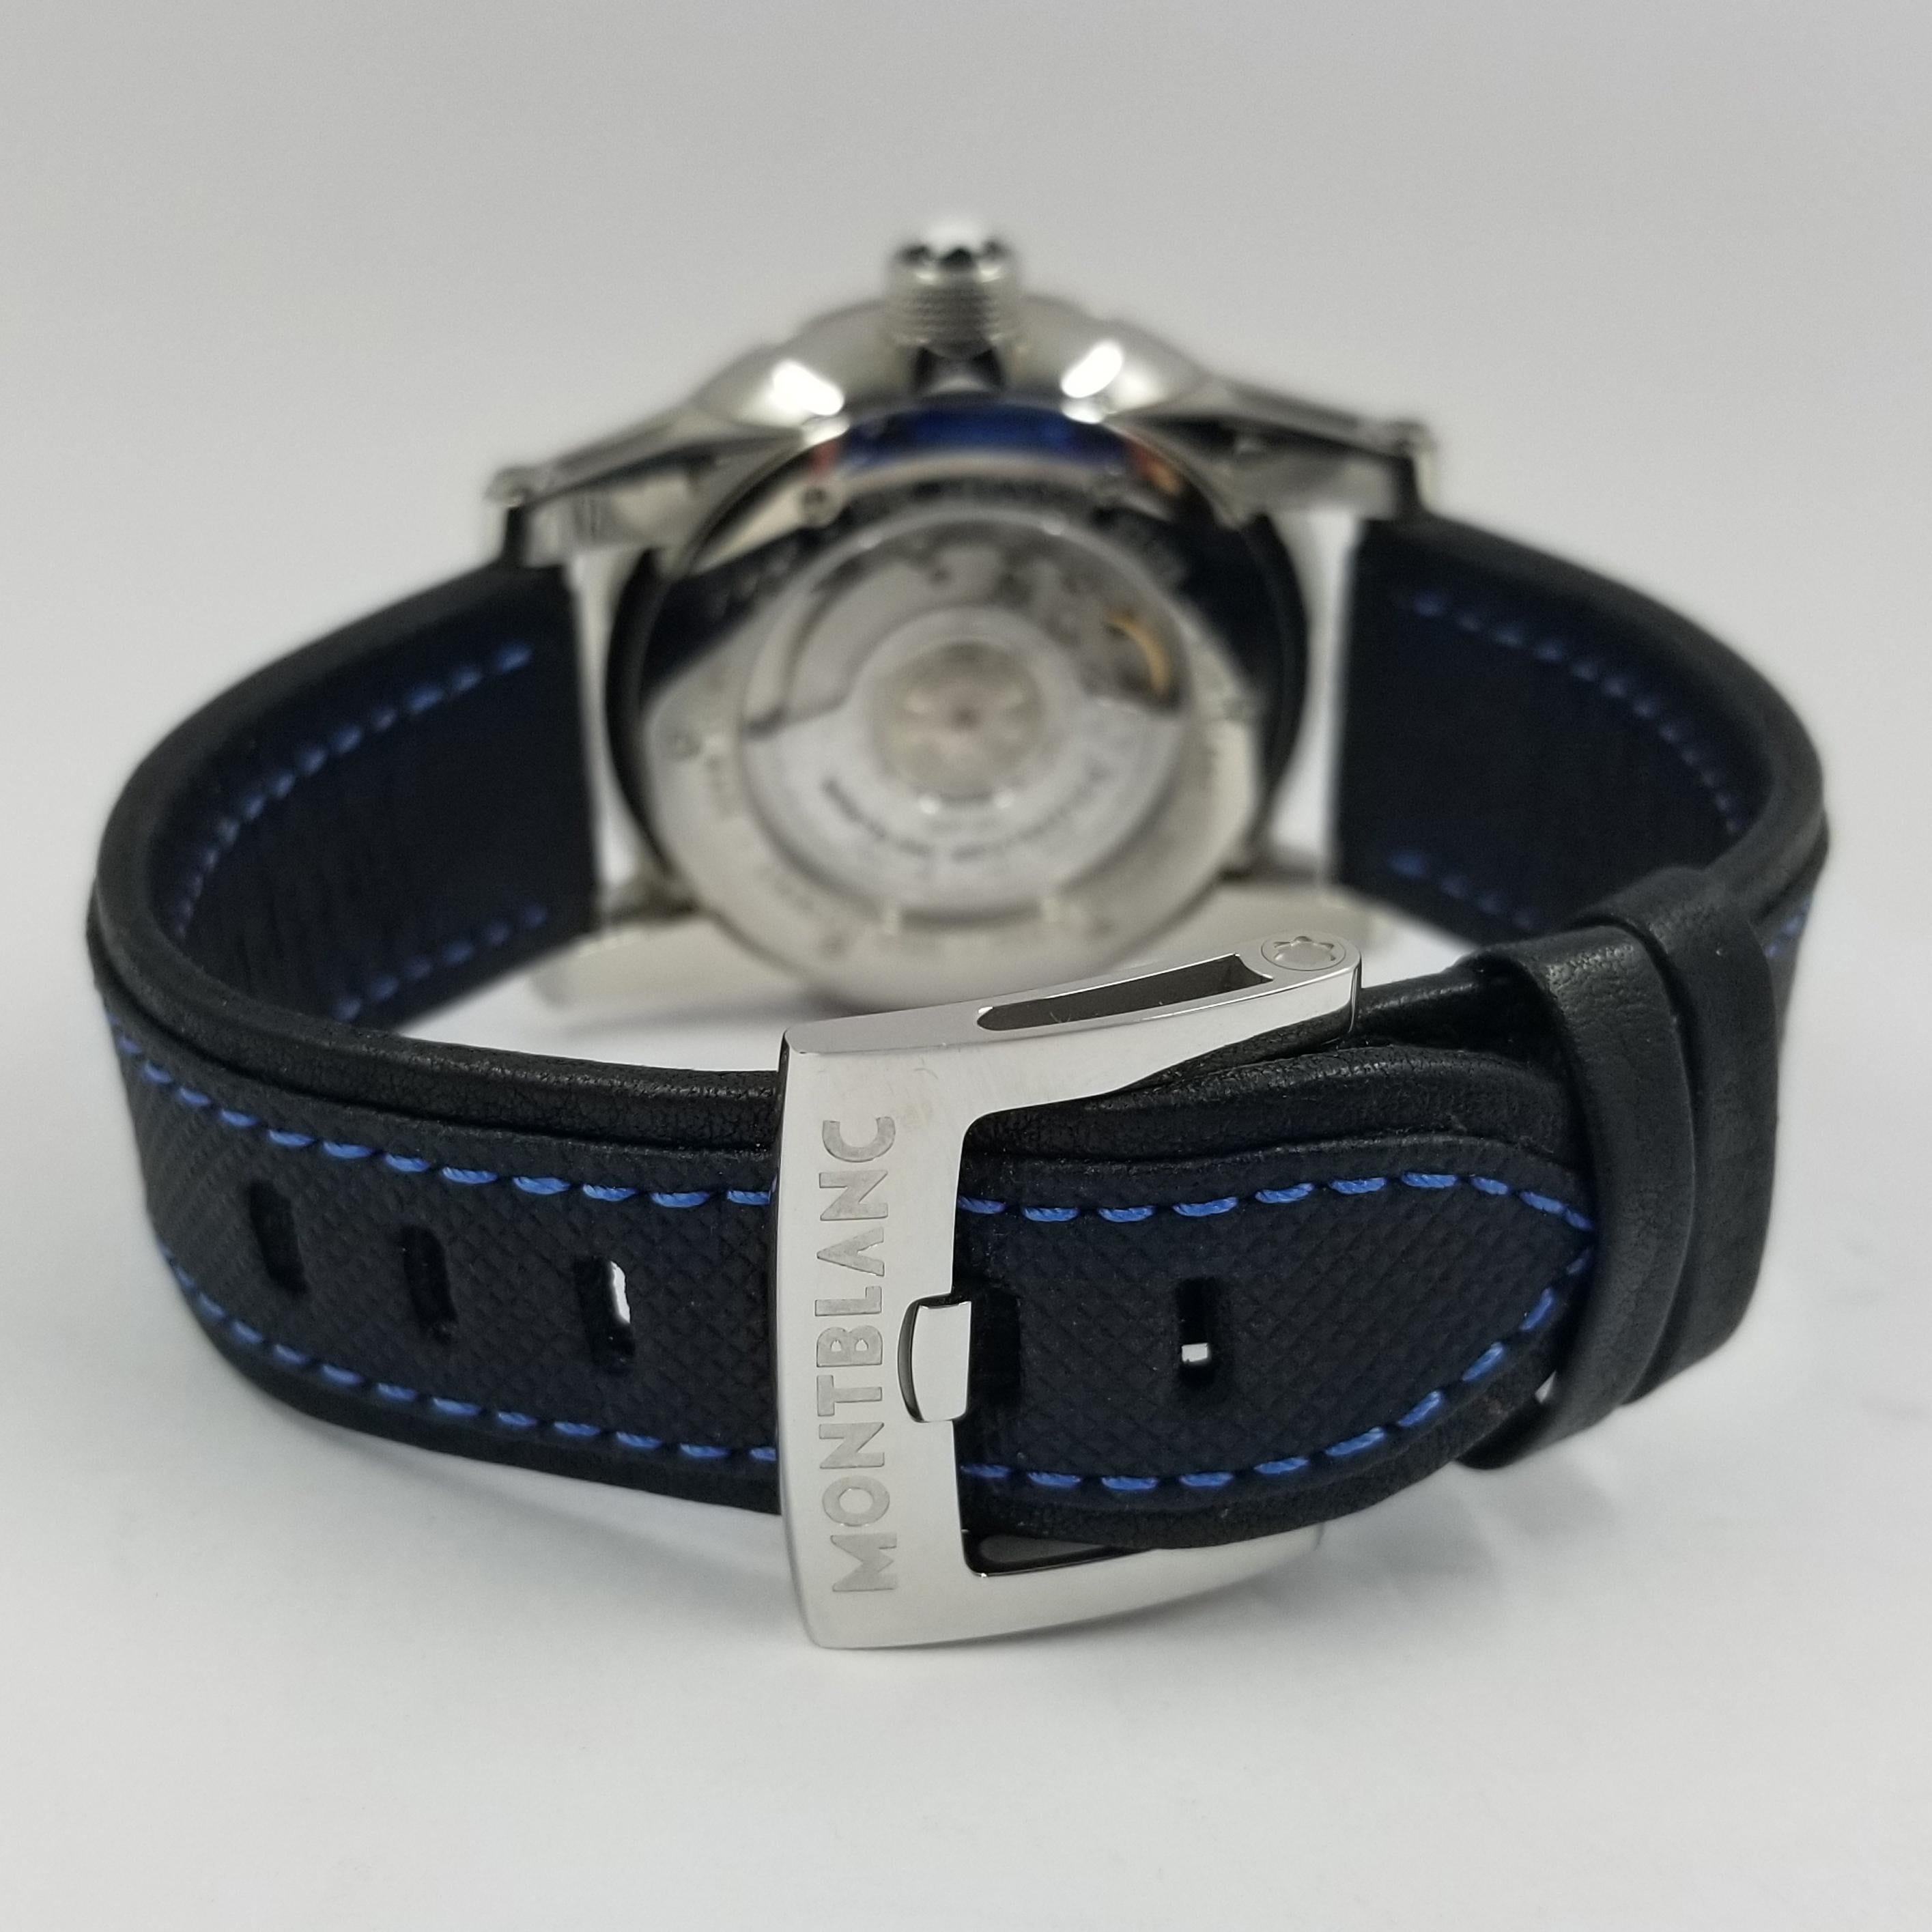 NEW Montblanc Wristwatch in Stainless Steel
$3,600 MSRP
Timewalker Collection Automatic Watch with UTC & Date Functions
43MM Case with Black Dial (blue and silver indicators)
Scratch resistant Sapphire Crystal
Black Leather Strap with Blue Stitching